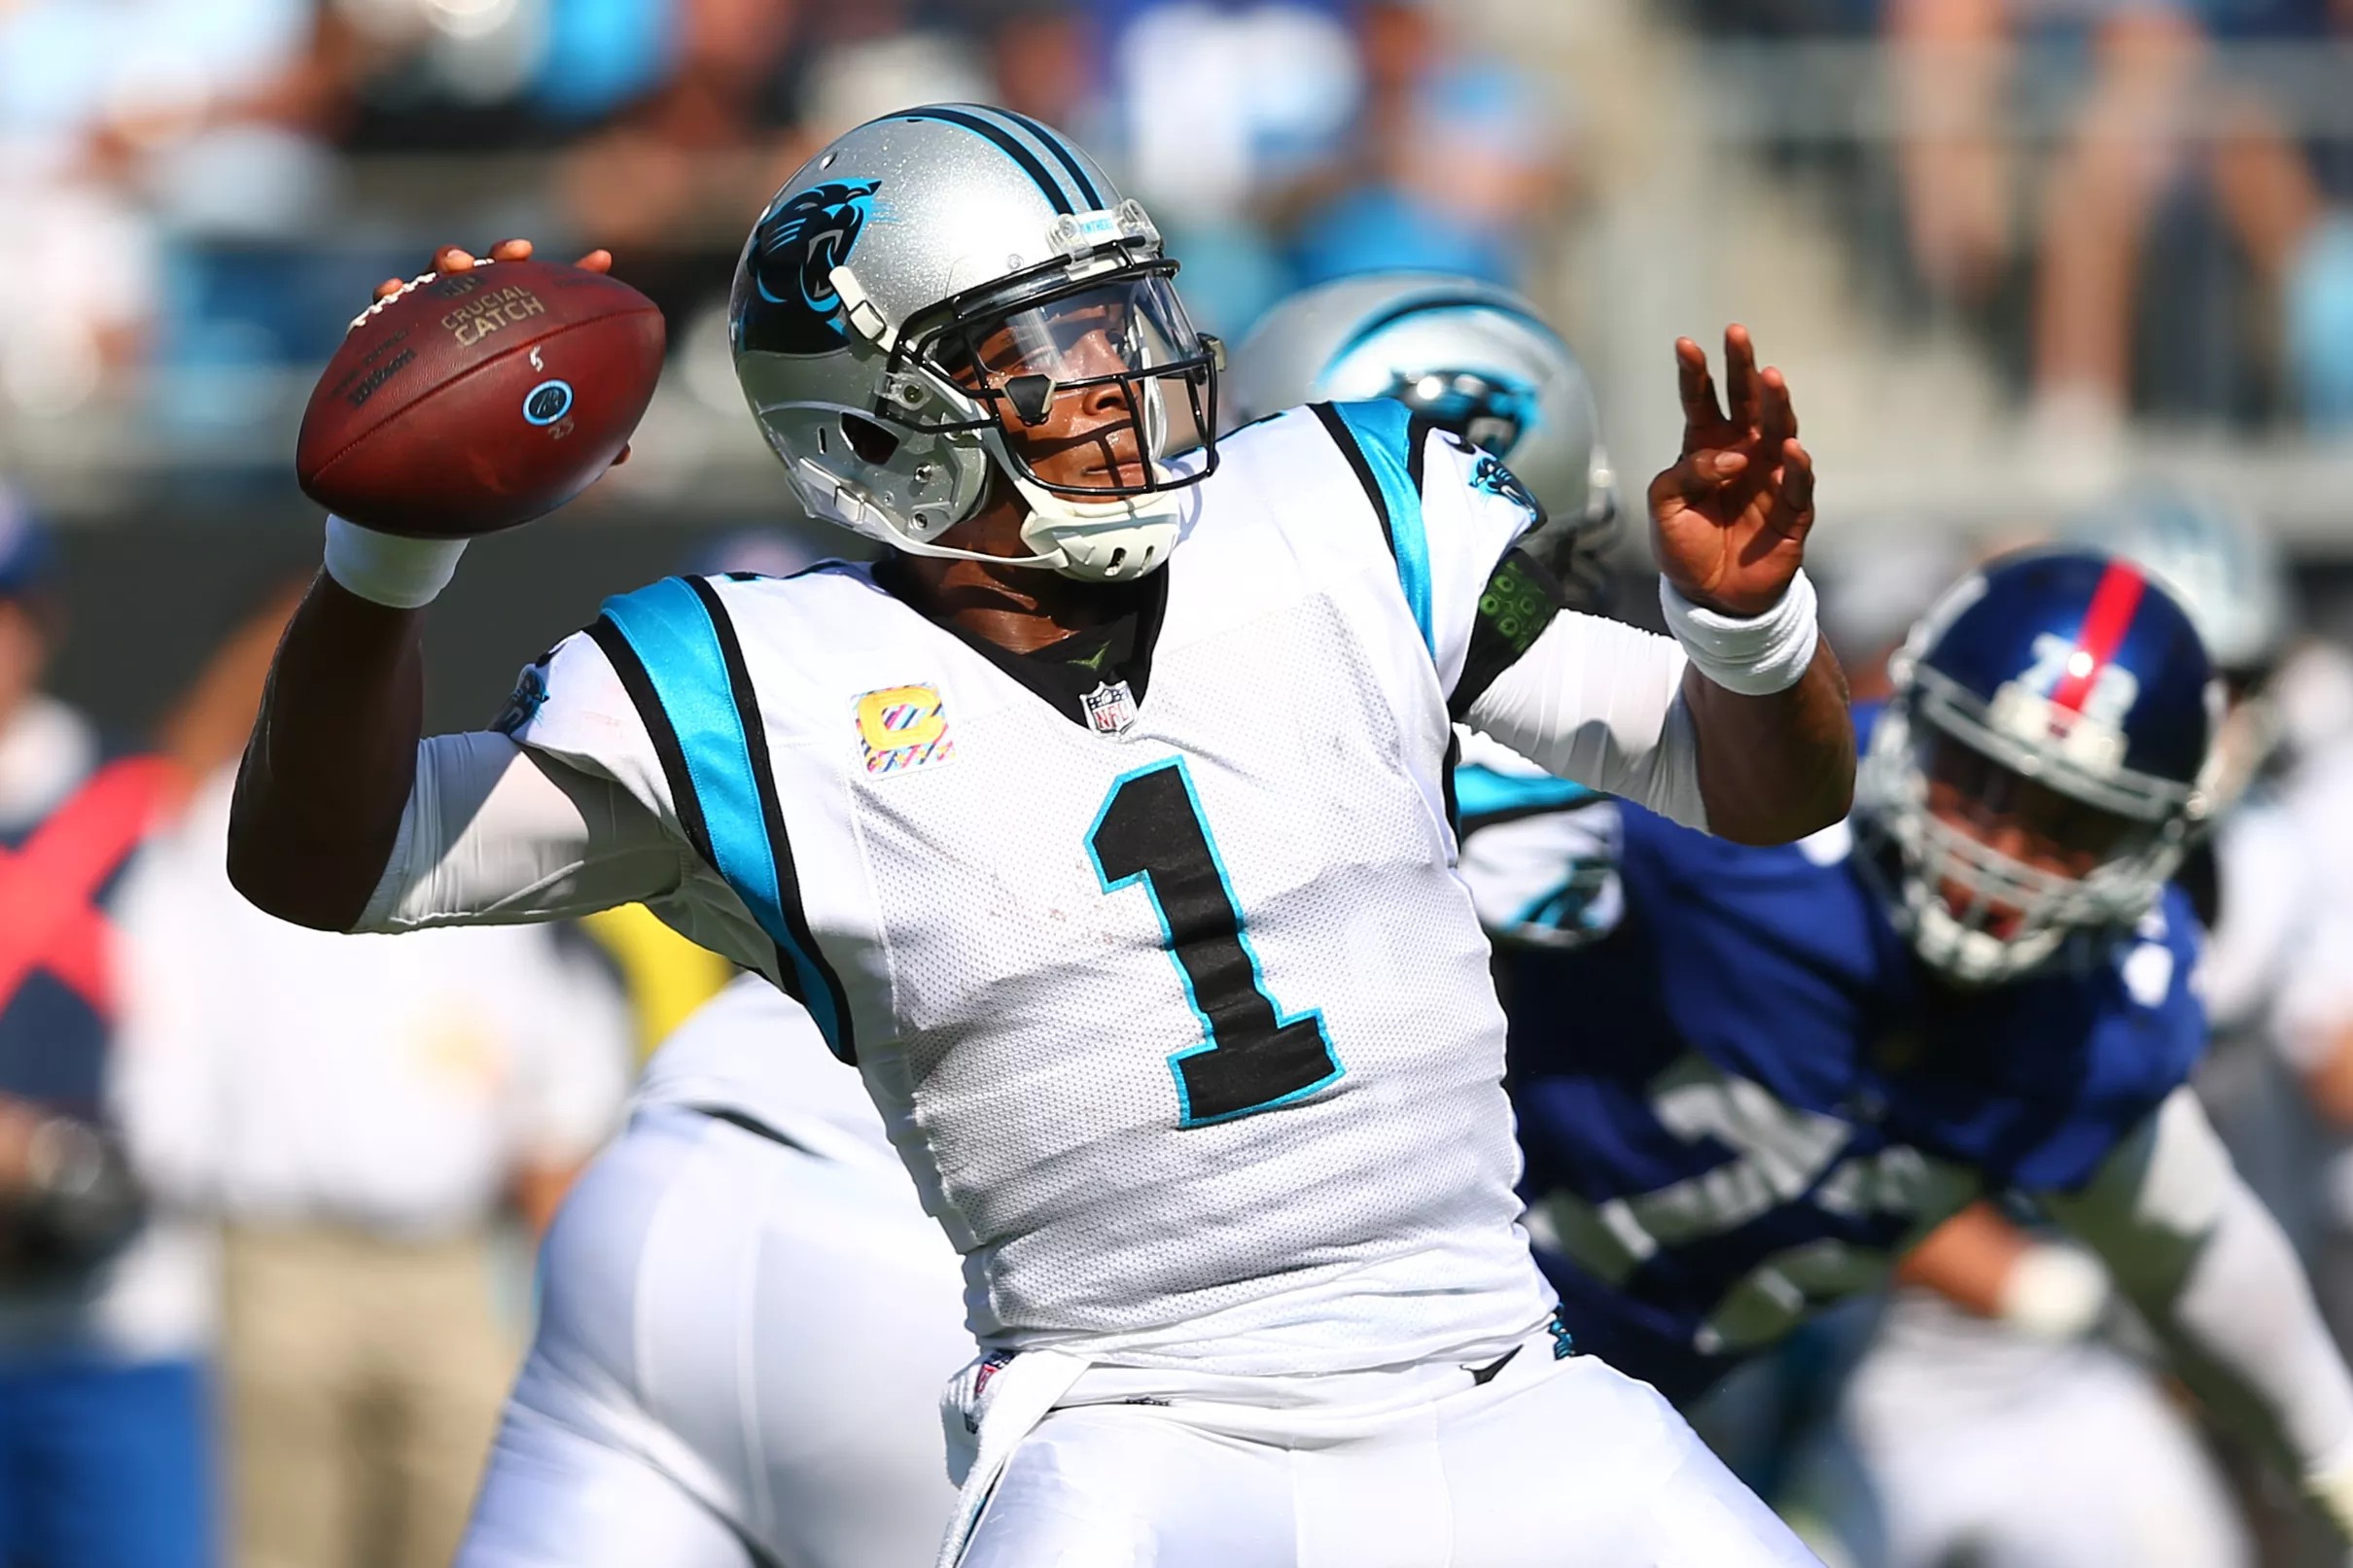 Panthers at Washington offensive preview The Panthers’ offense faces a